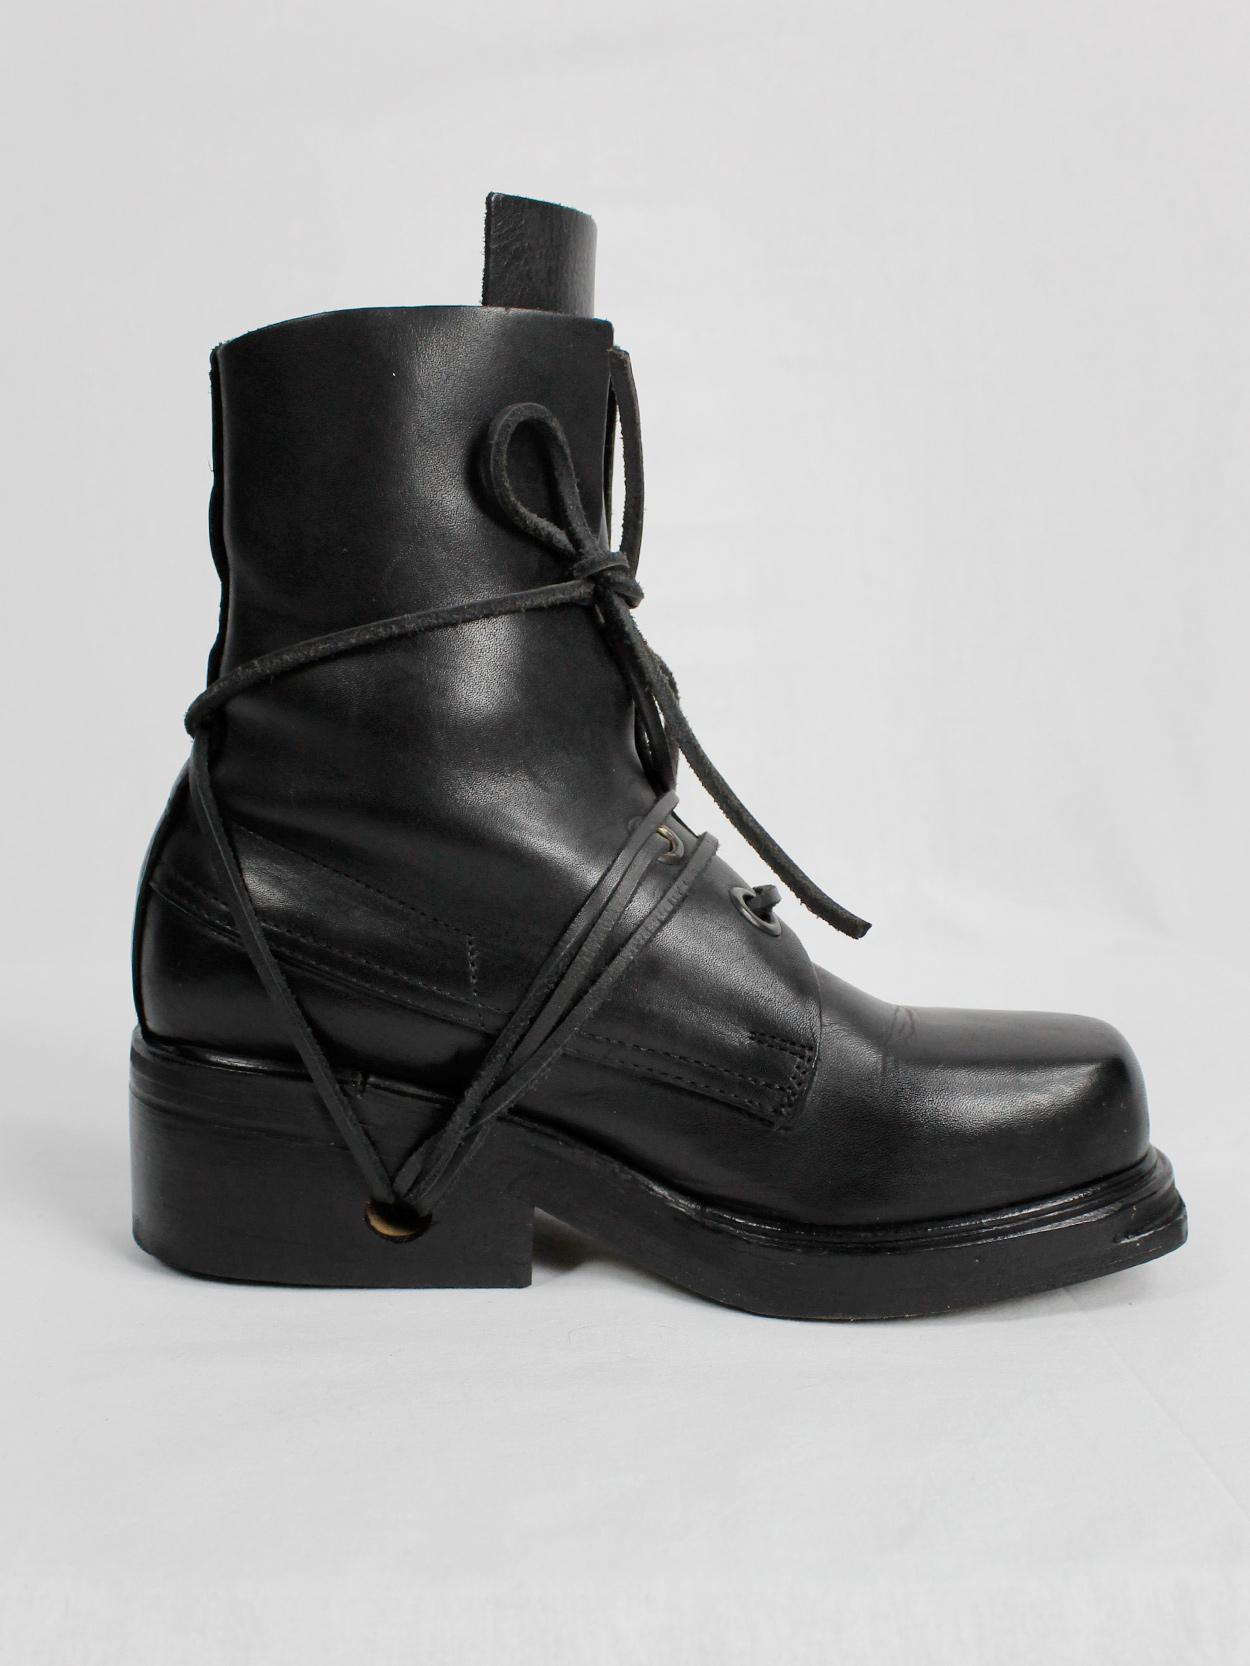 Dirk Bikkembergs black mountaineering boots with eyelets and laces ...